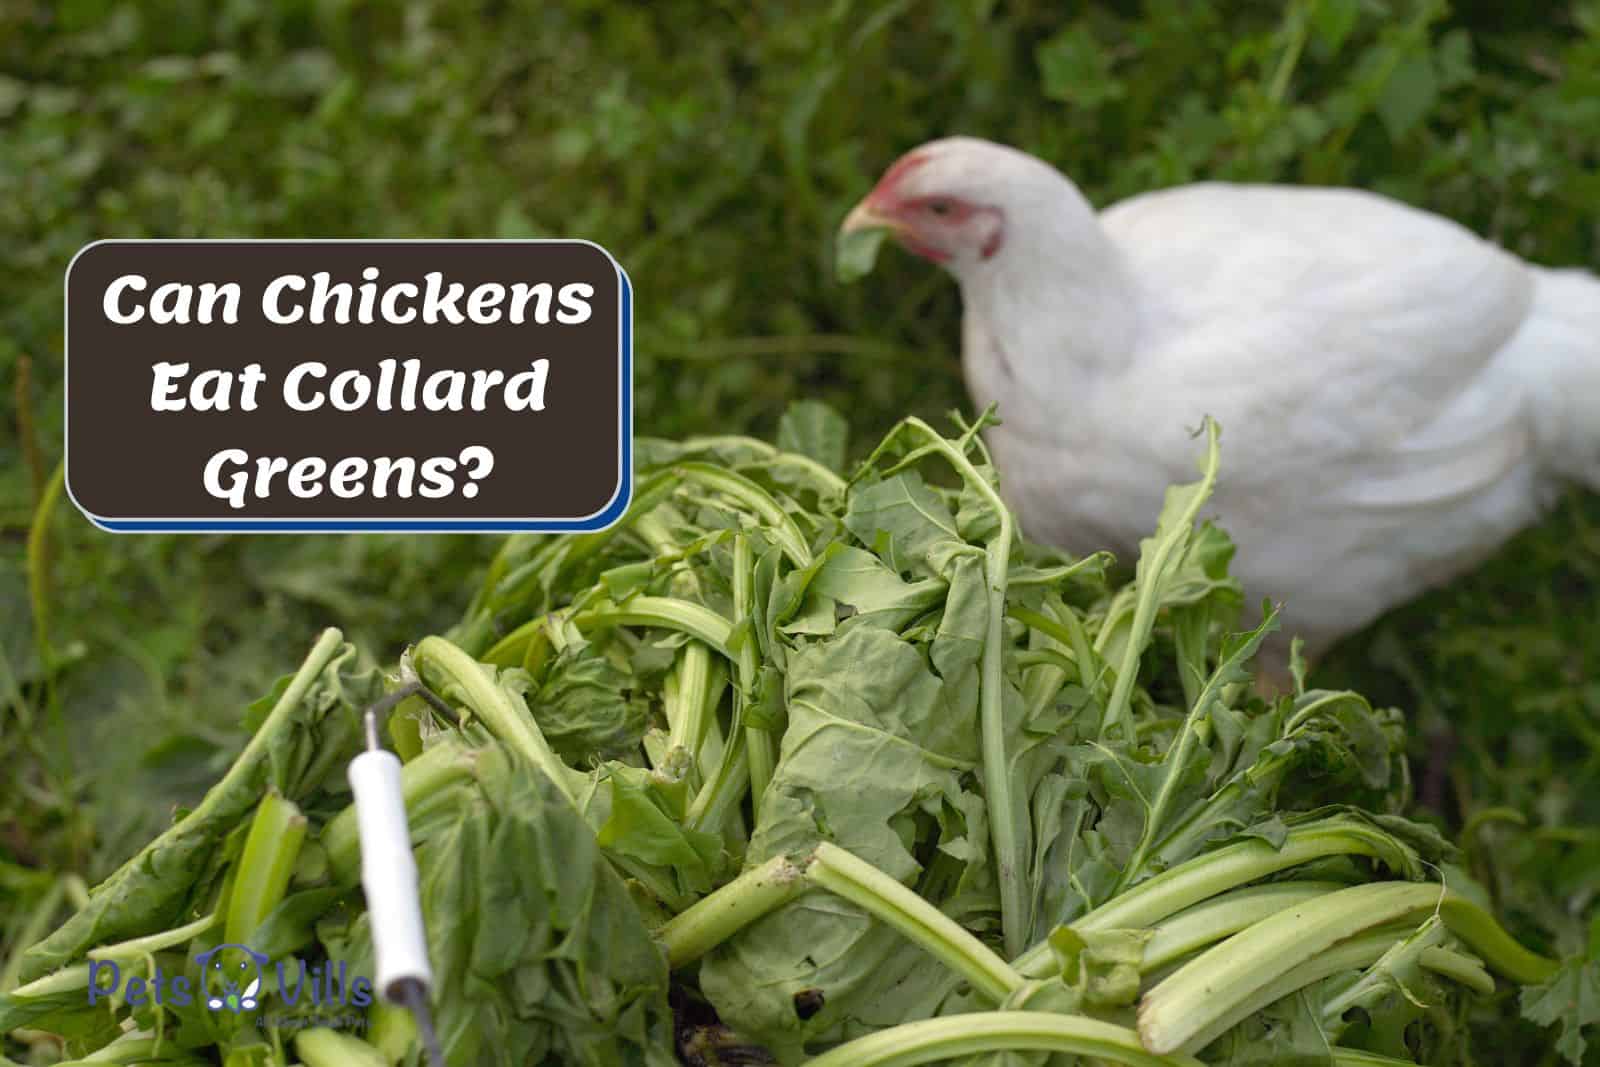 a white chicken eating collards but Can Chickens Eat Collard Greens?